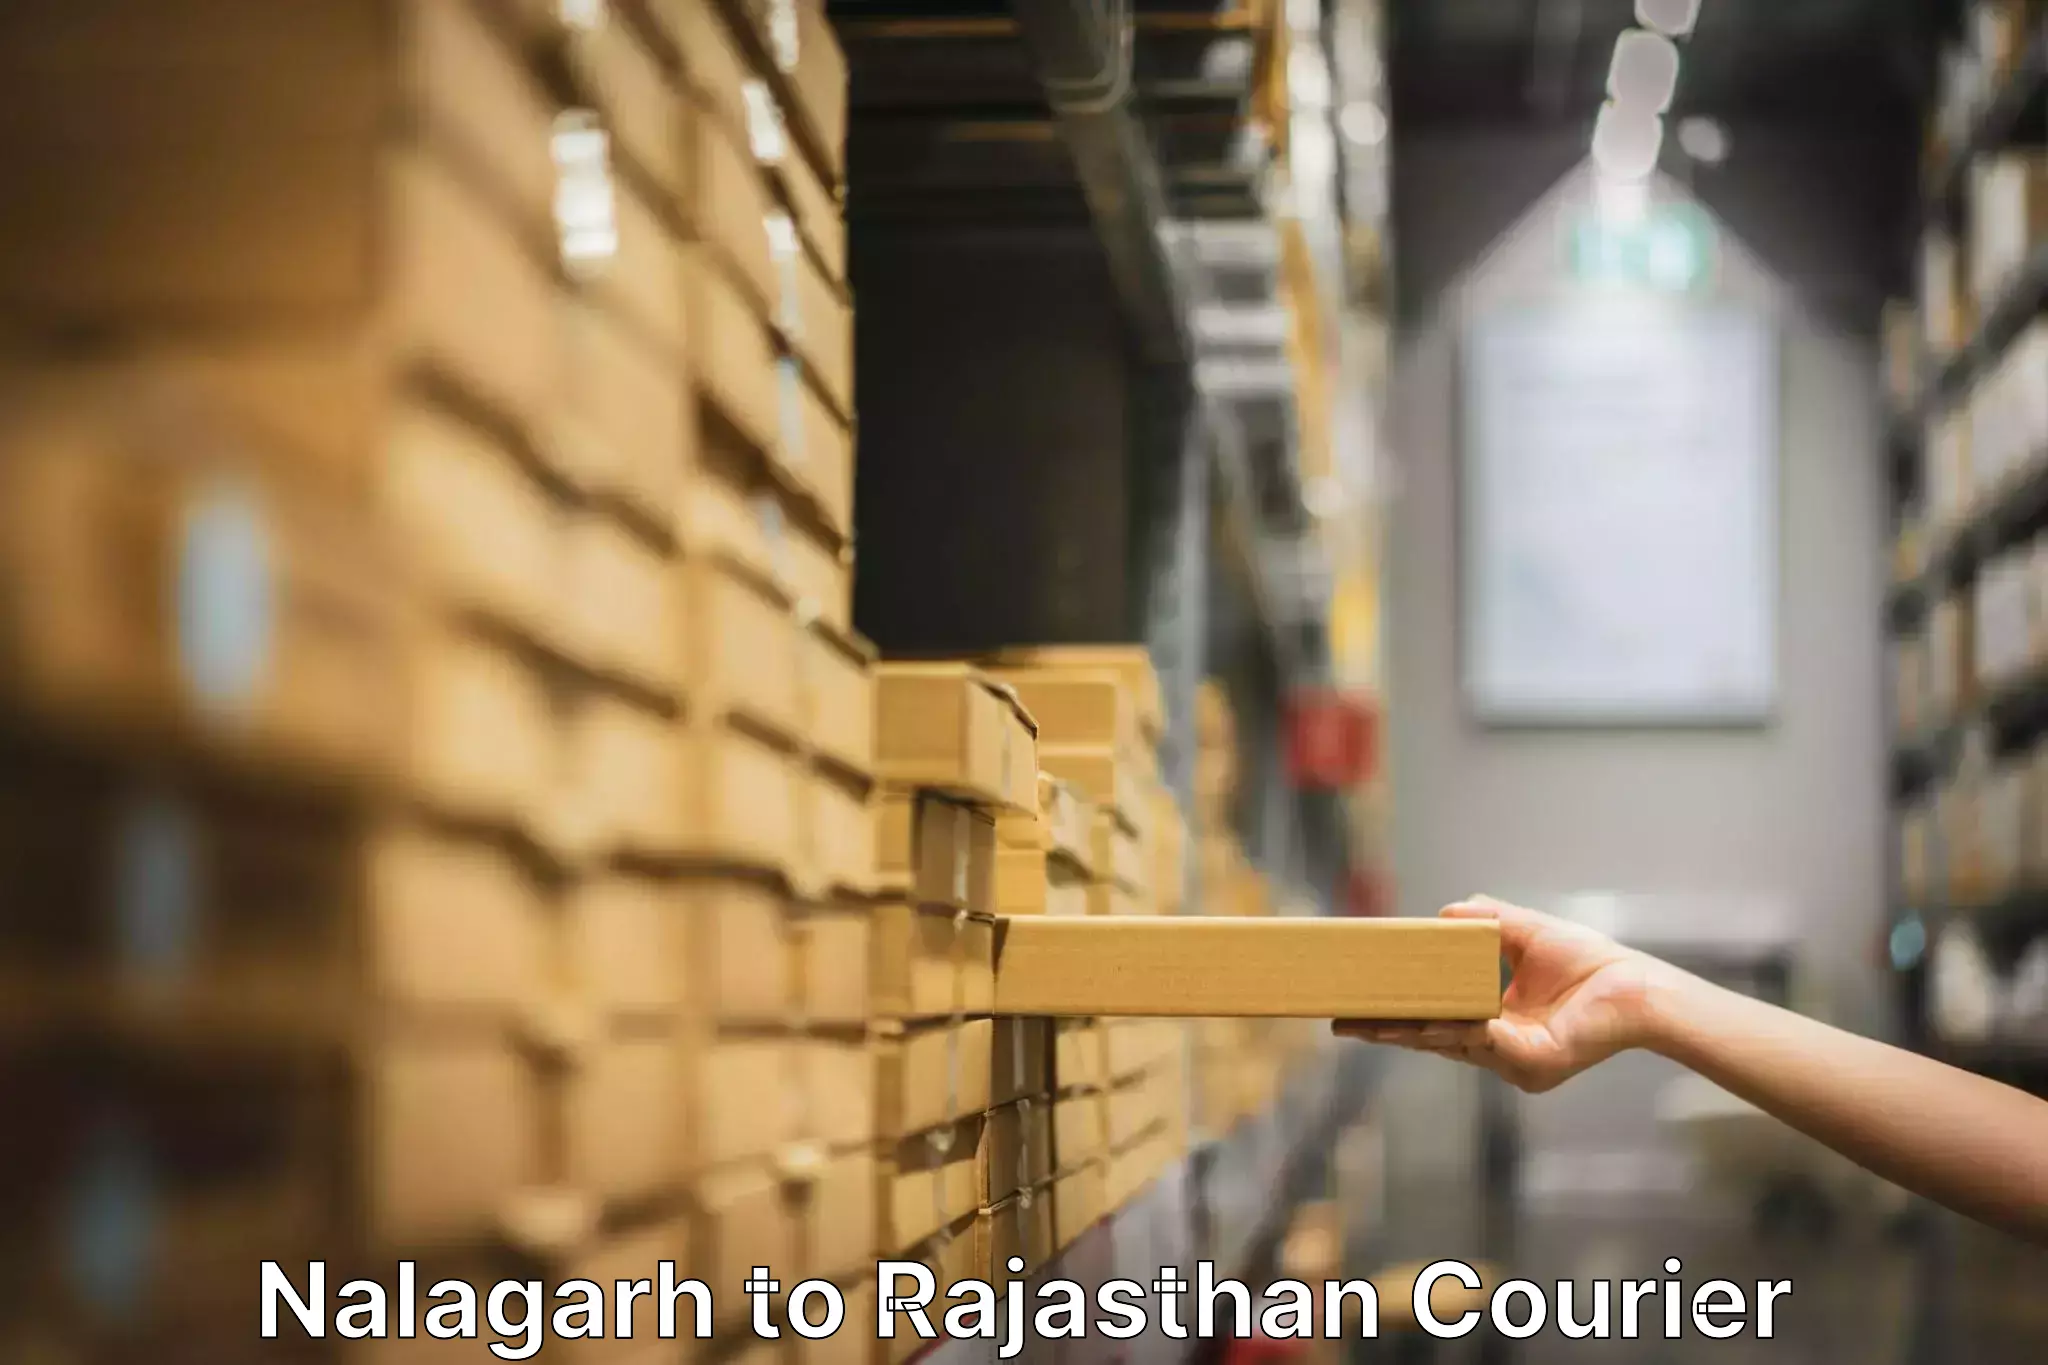 Furniture moving specialists Nalagarh to Piparcity